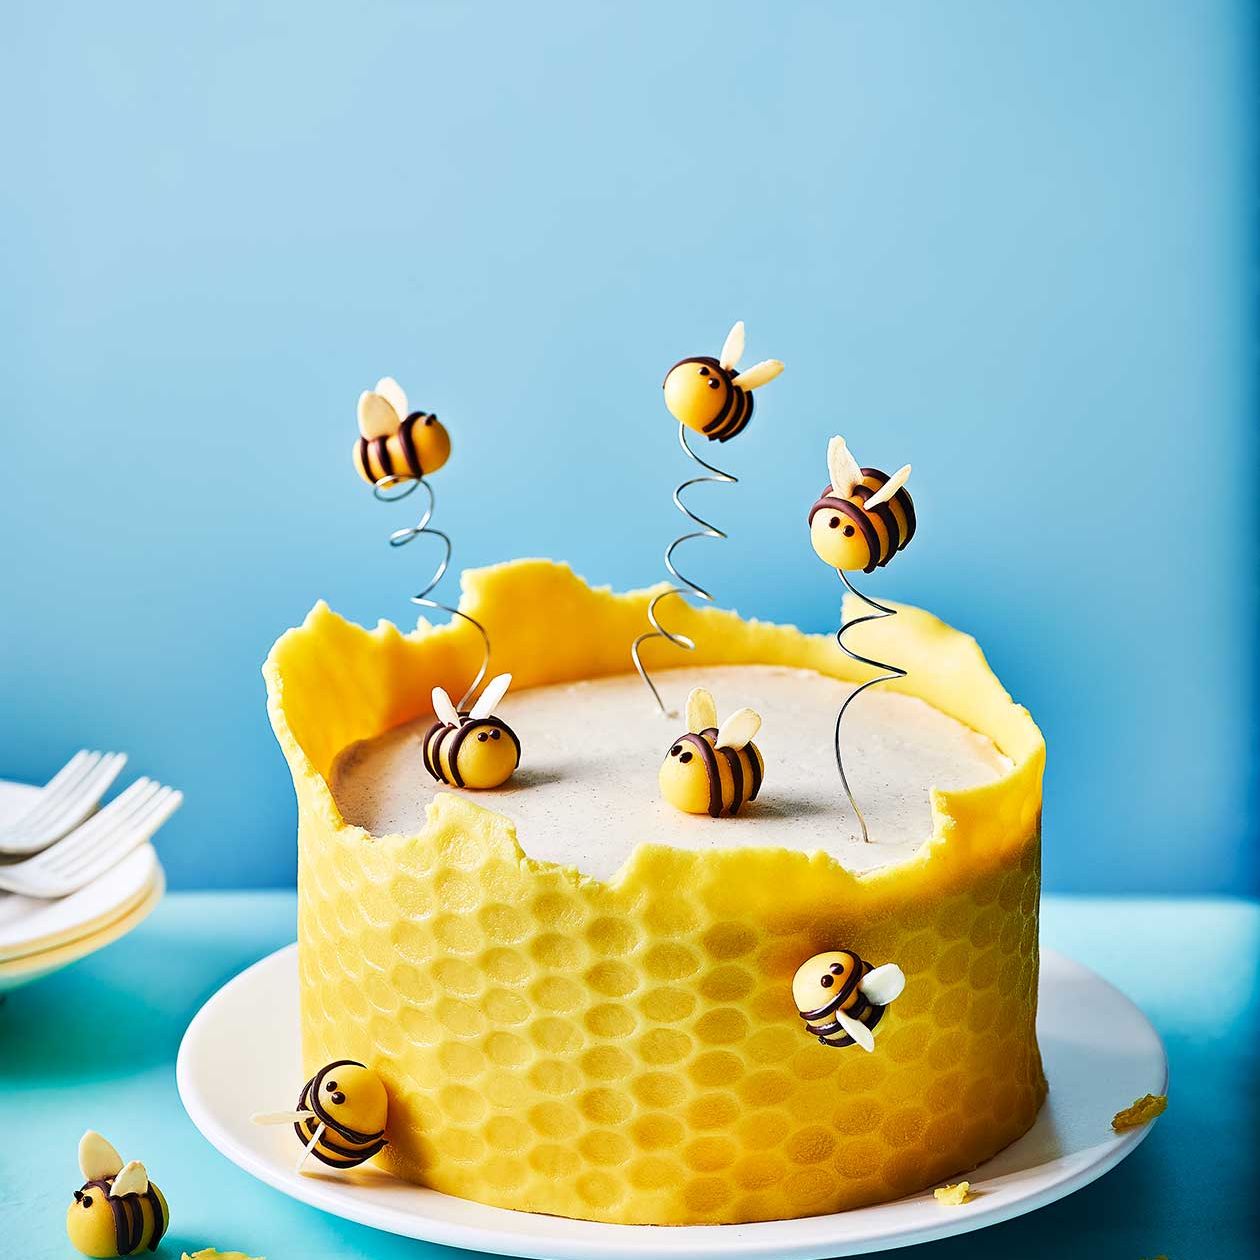 Hive Honey Cake 500 g Online at Best Price | Brought In Cakes | Lulu UAE